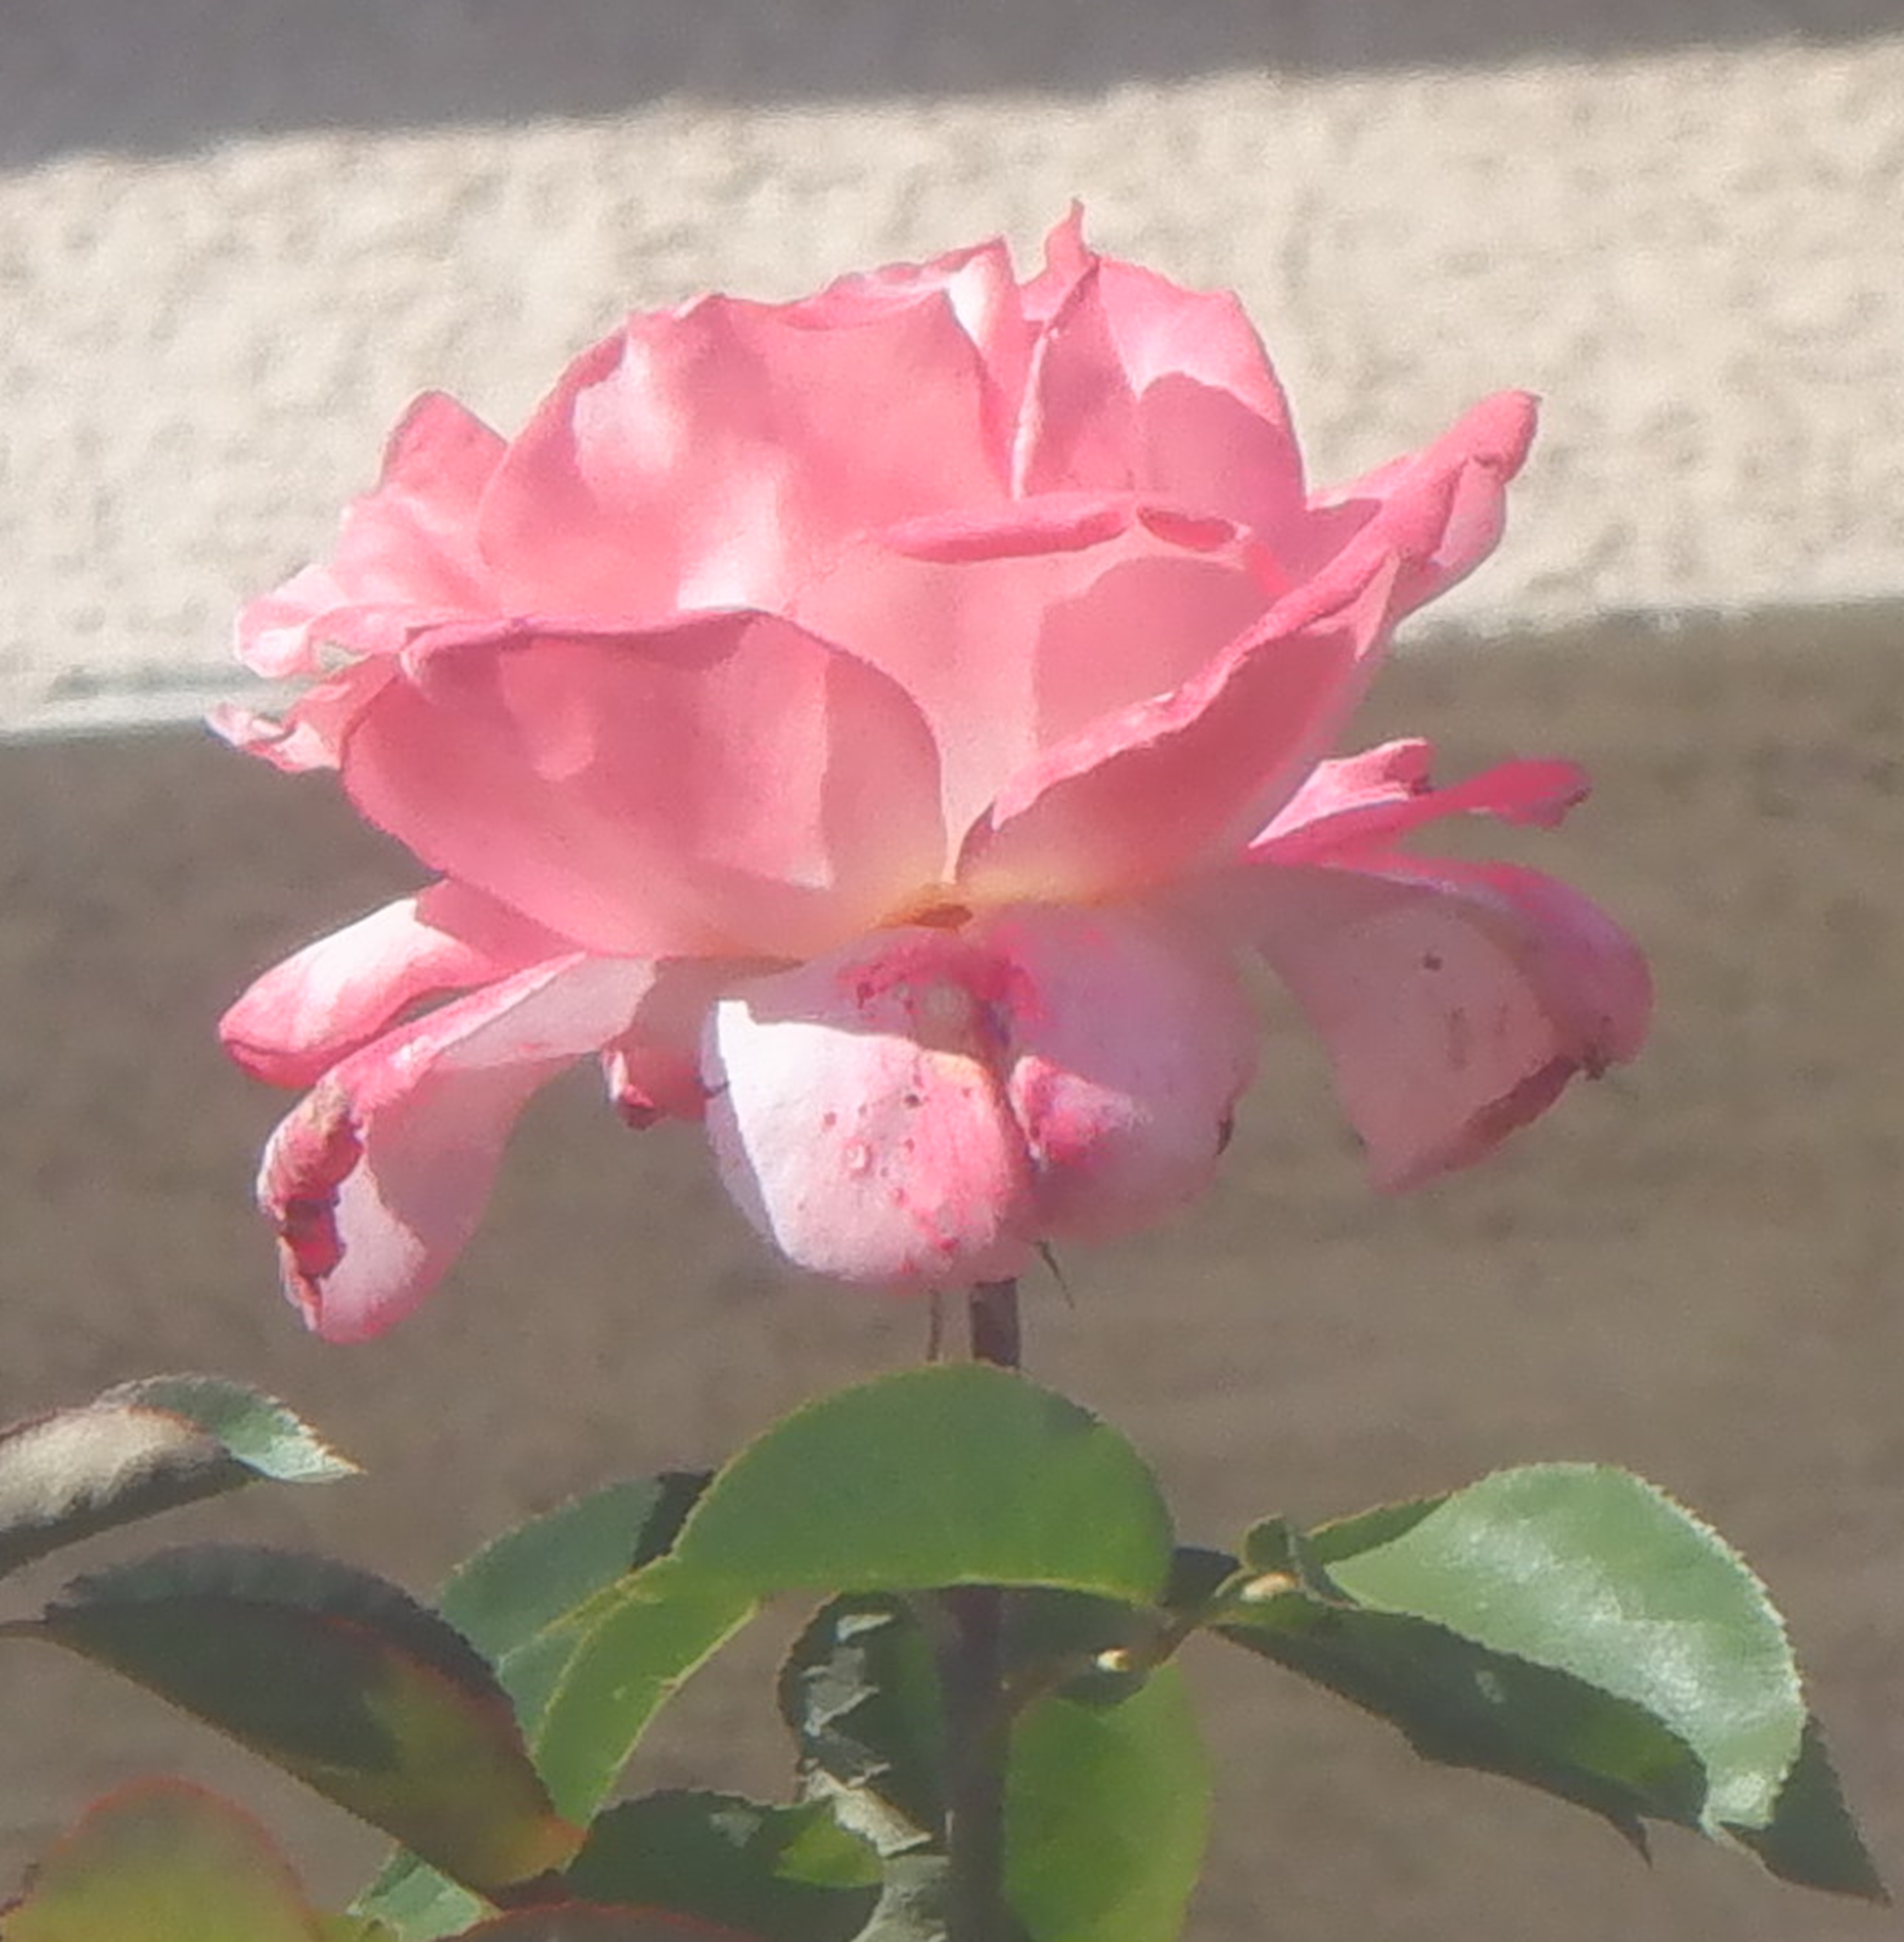 Second cropped photo of a single rose 10-31-22